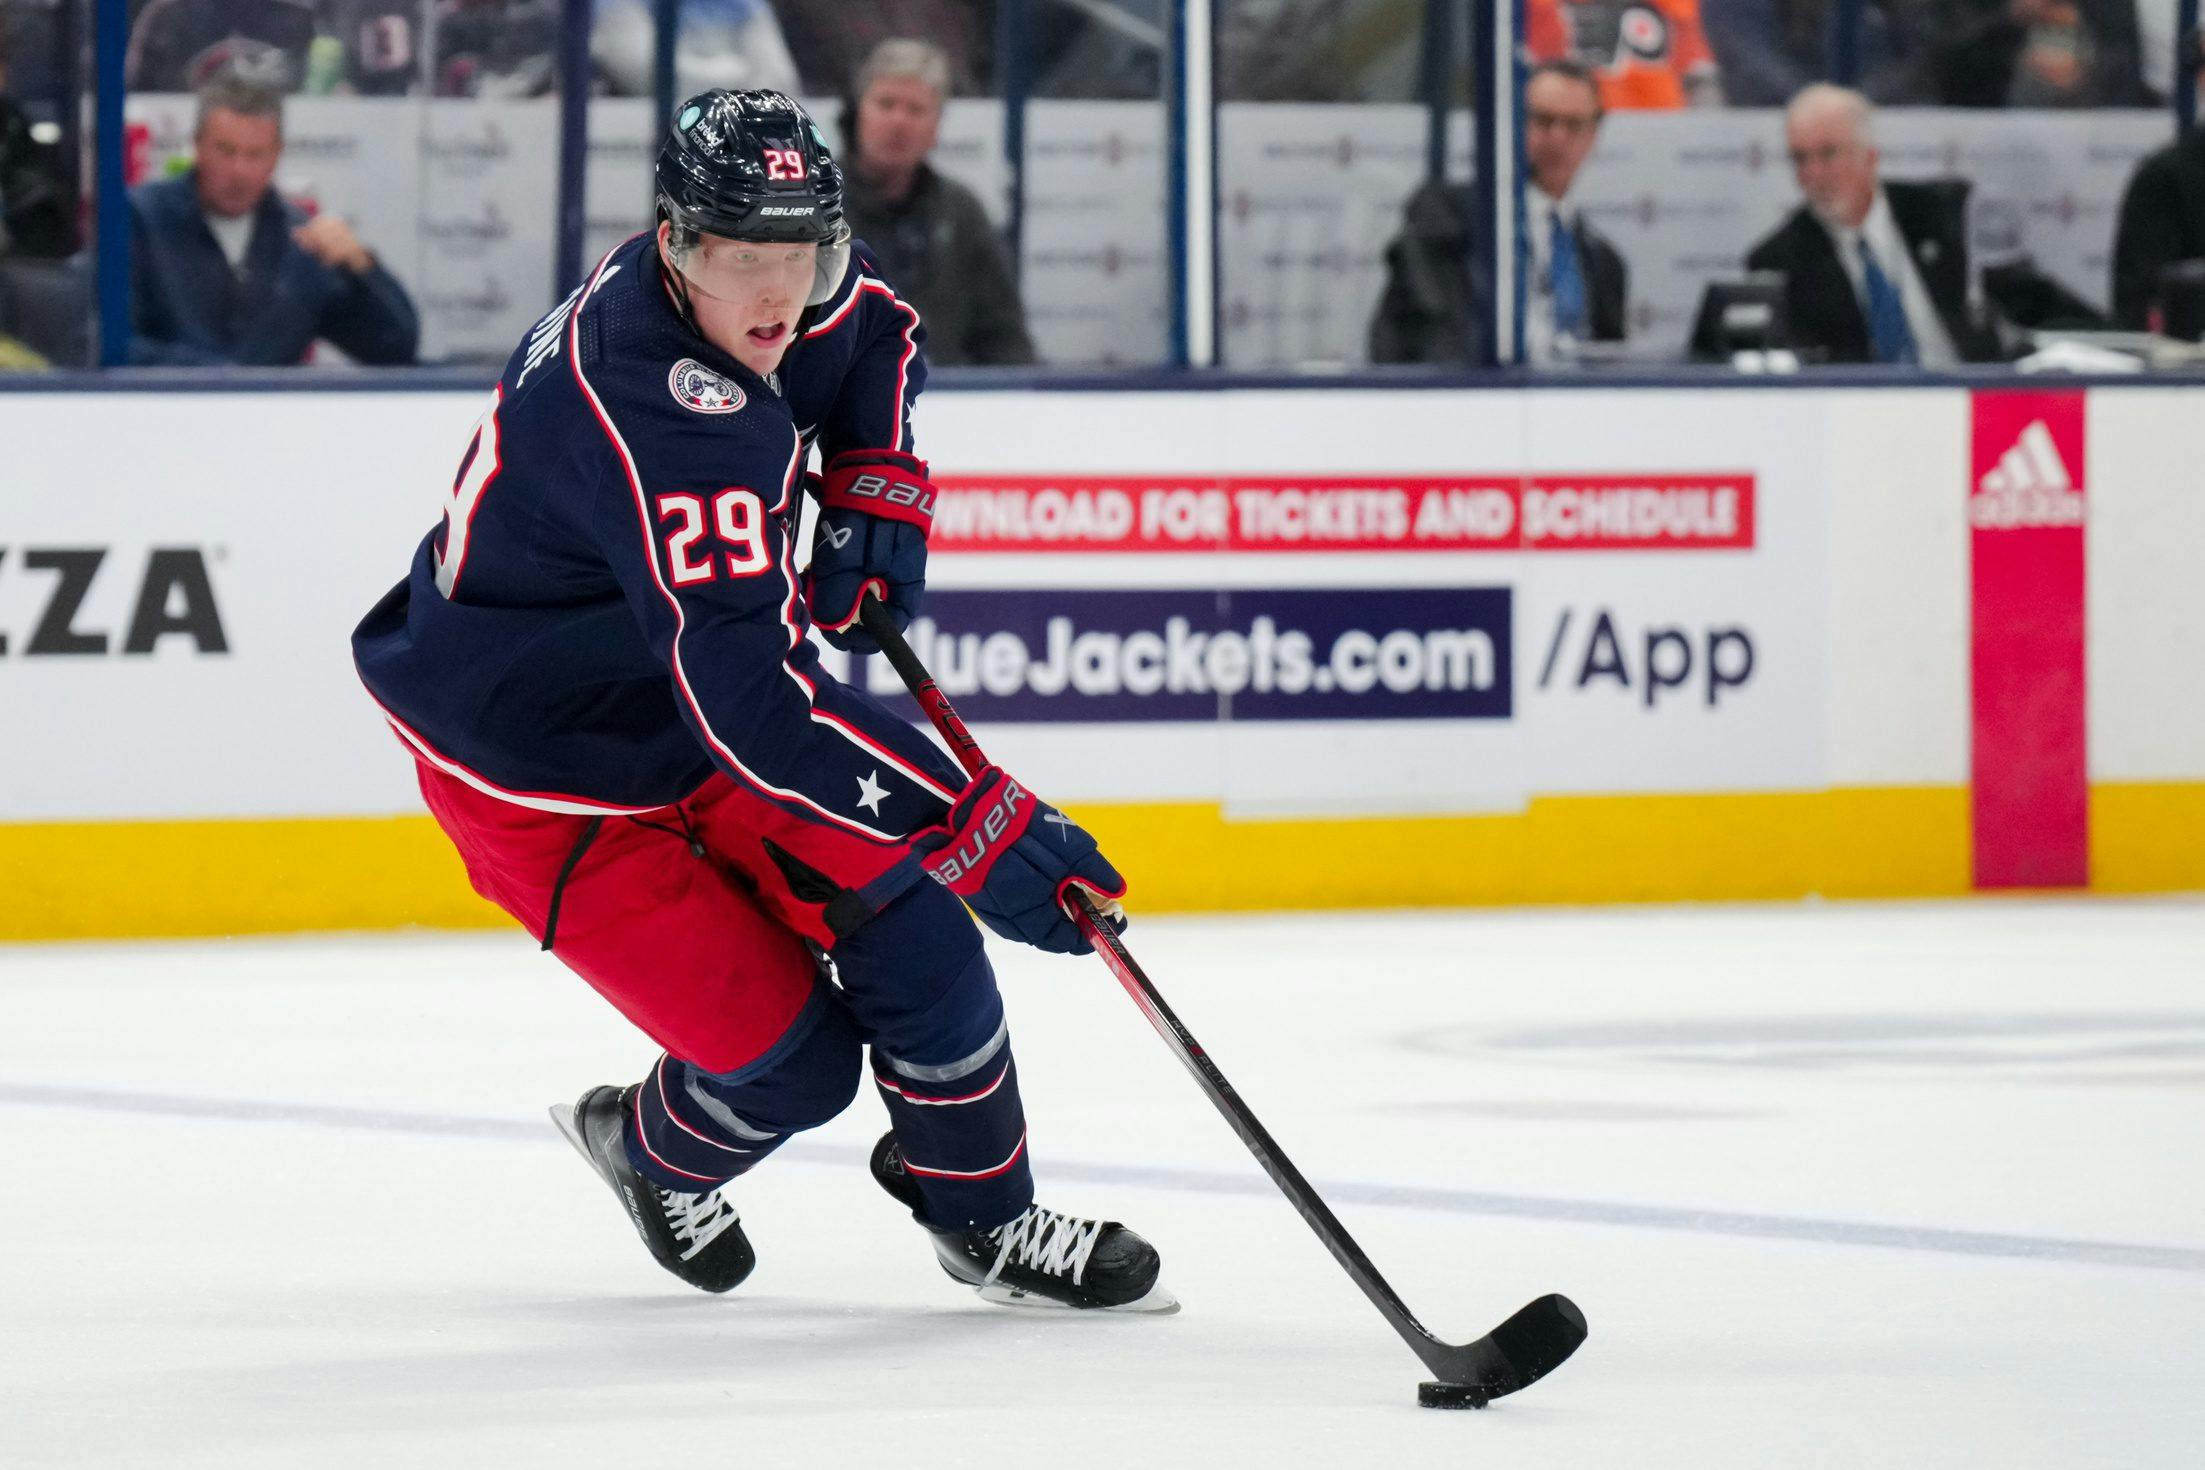 Blue Jackets' Laine: 'I want to stay here for sure